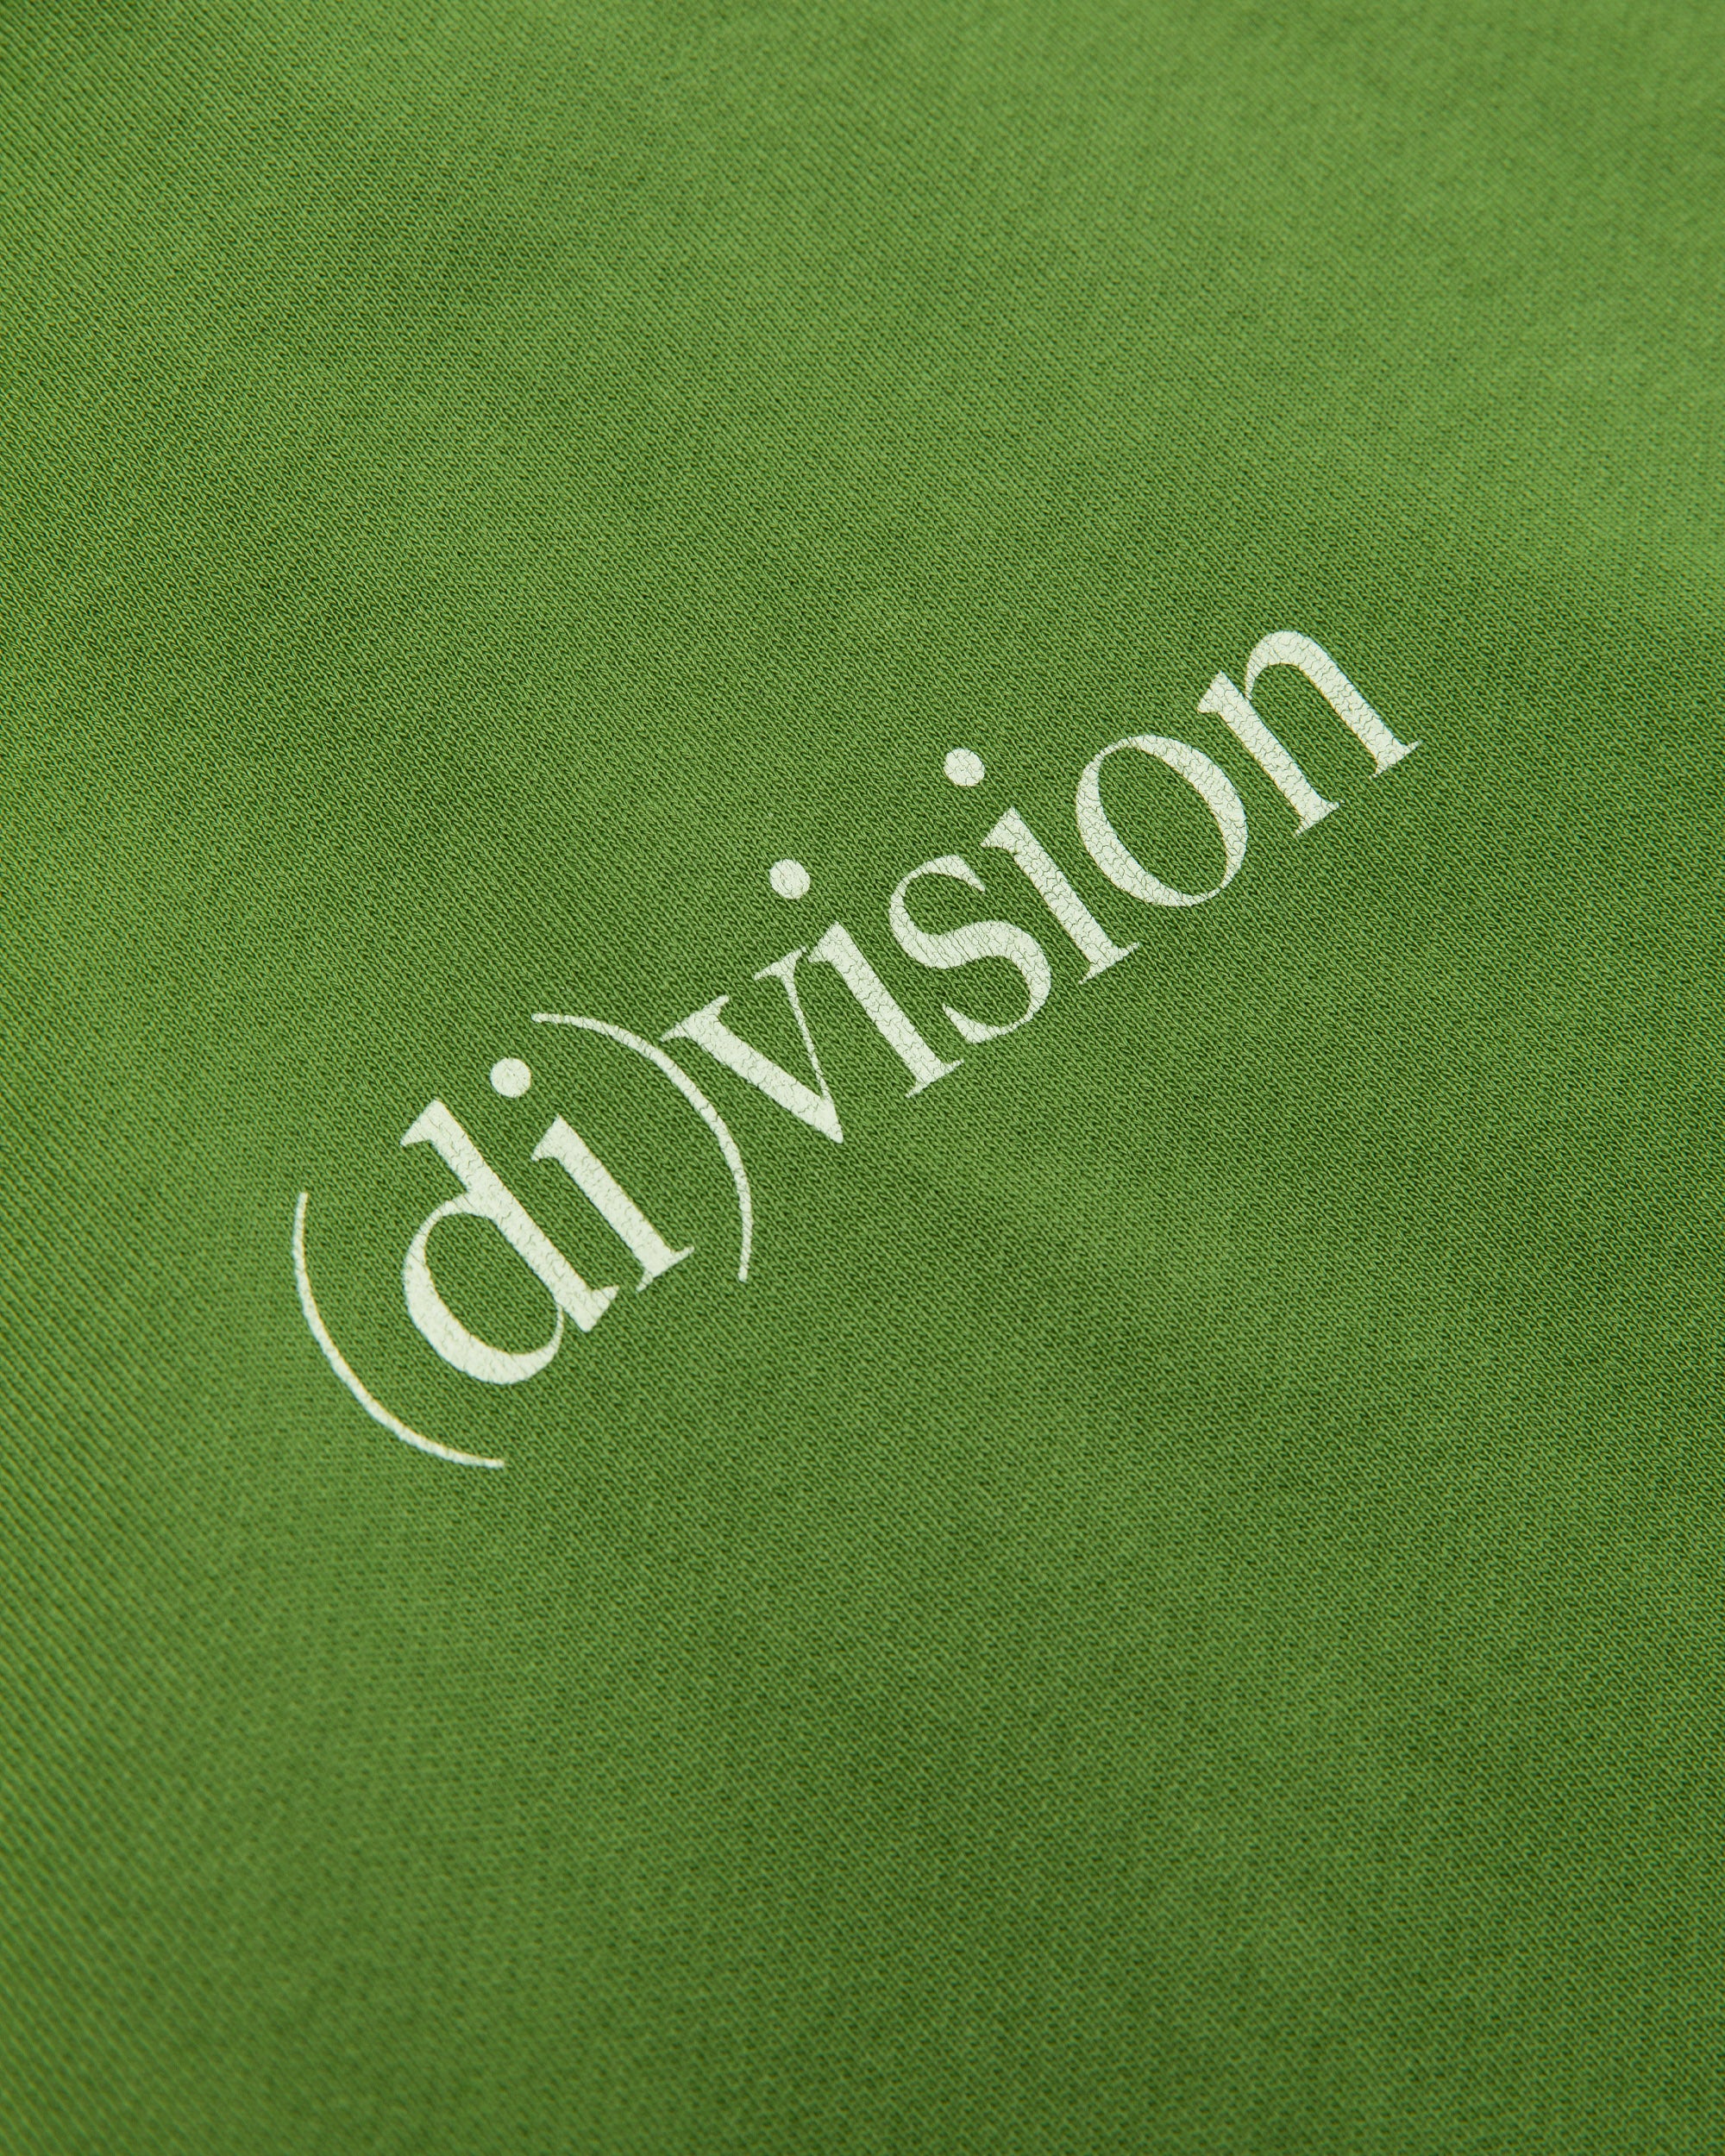 (DI)VISION Logo Hoodie Cotton Hedge Green AW21_D_009-1